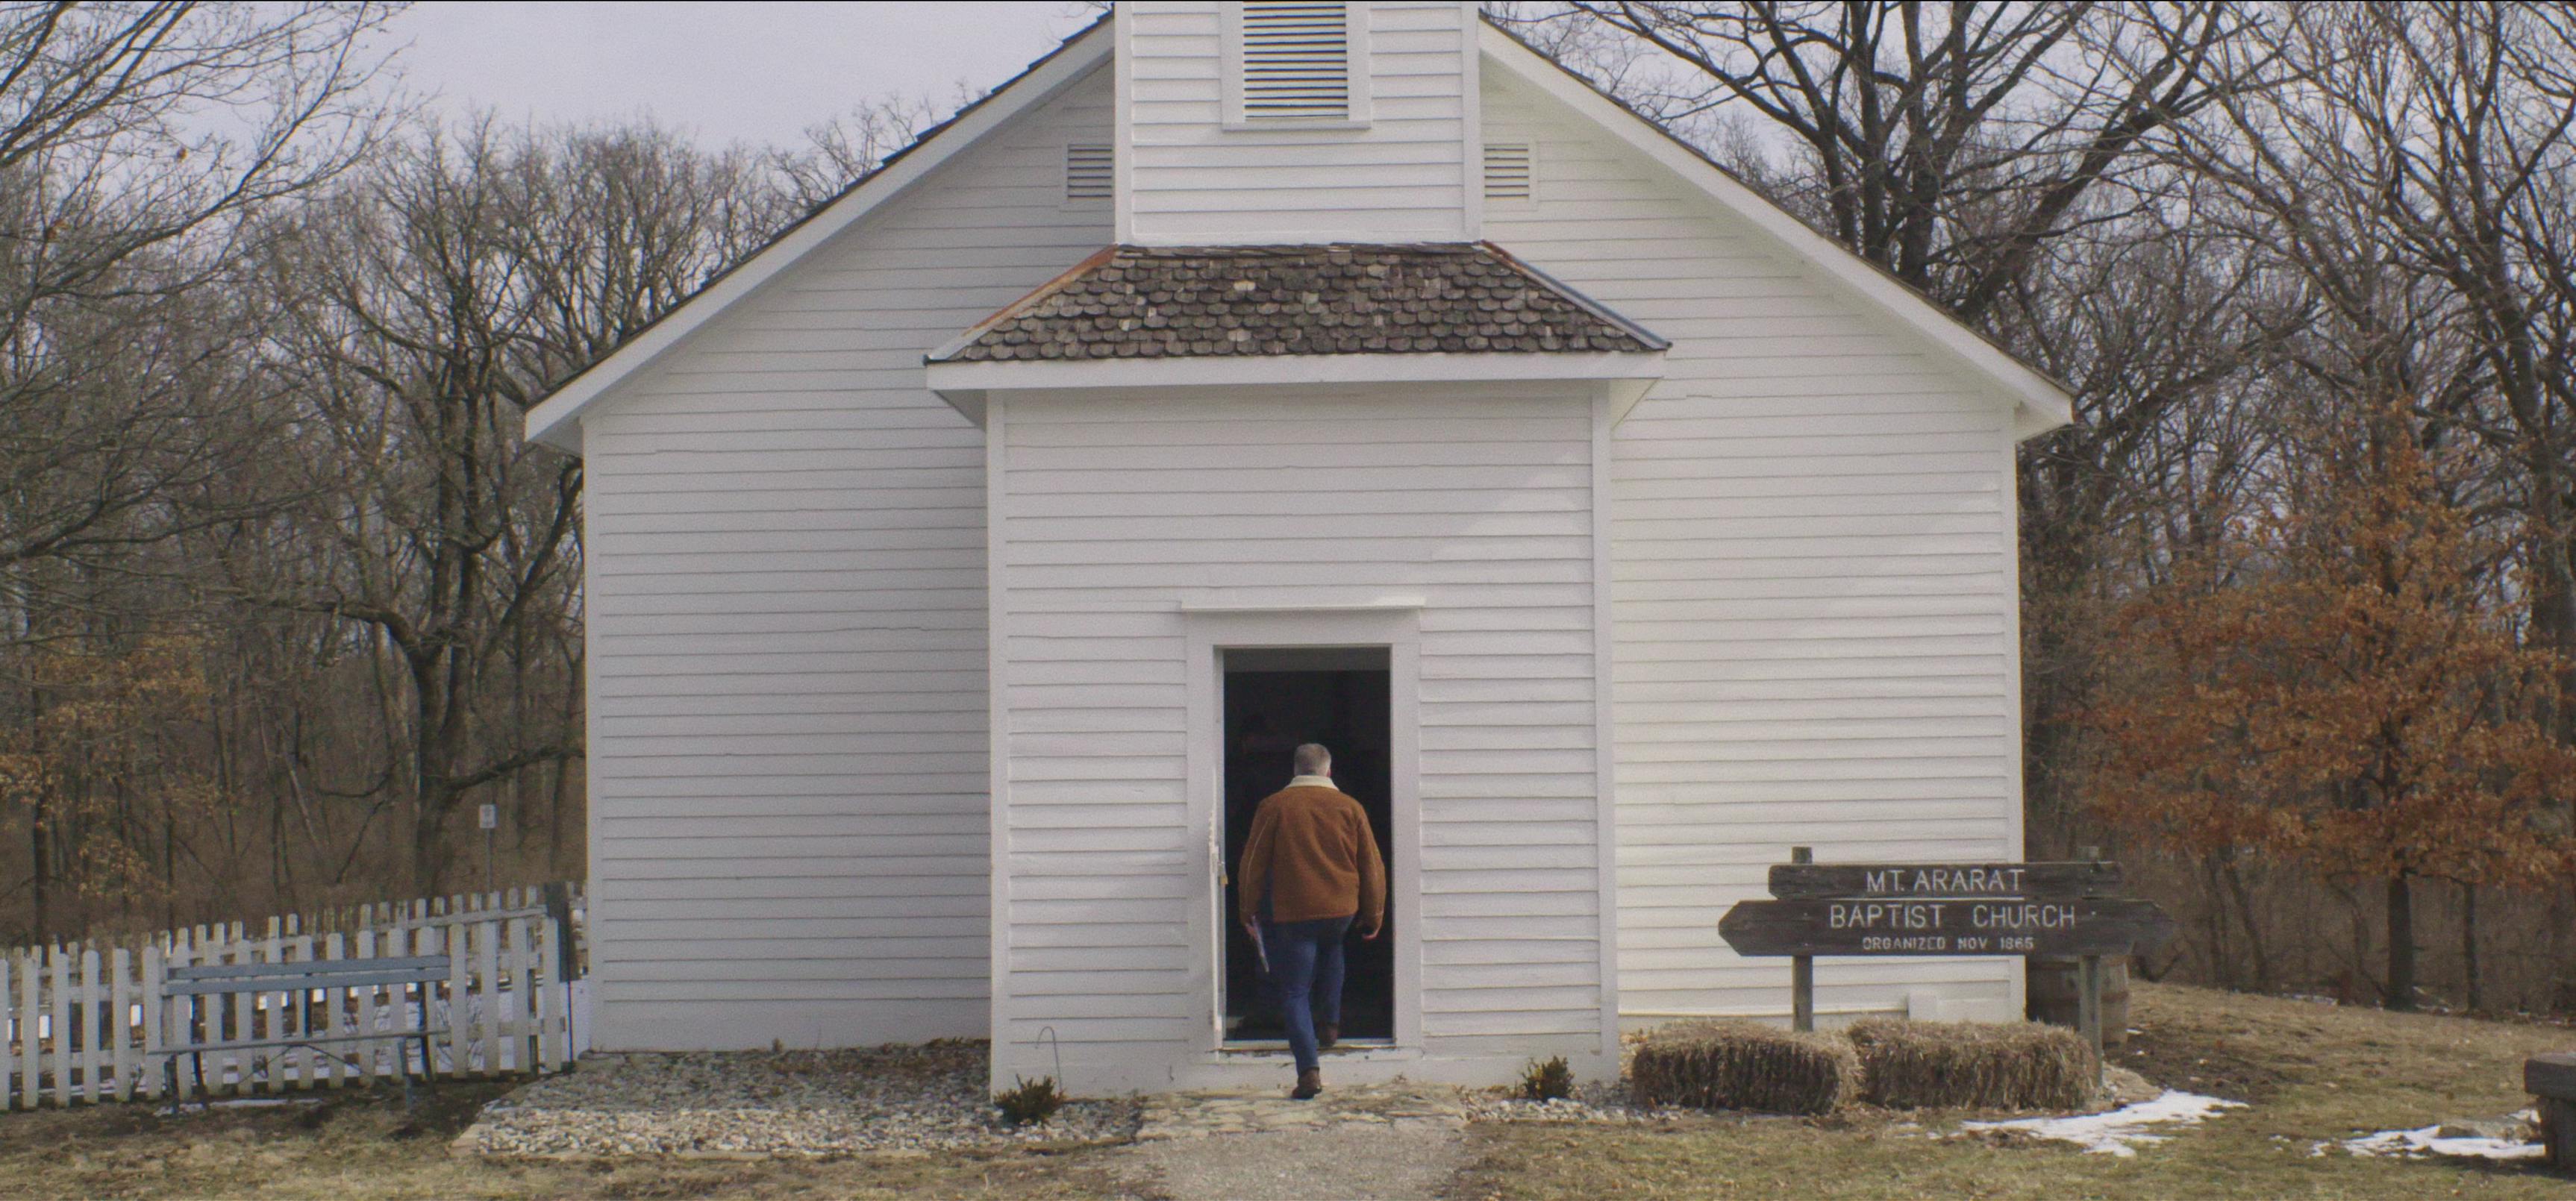 Dan Laurine enters a small white wooden church surrounded by bare trees and there are a couple of small patches of snow on the ground.